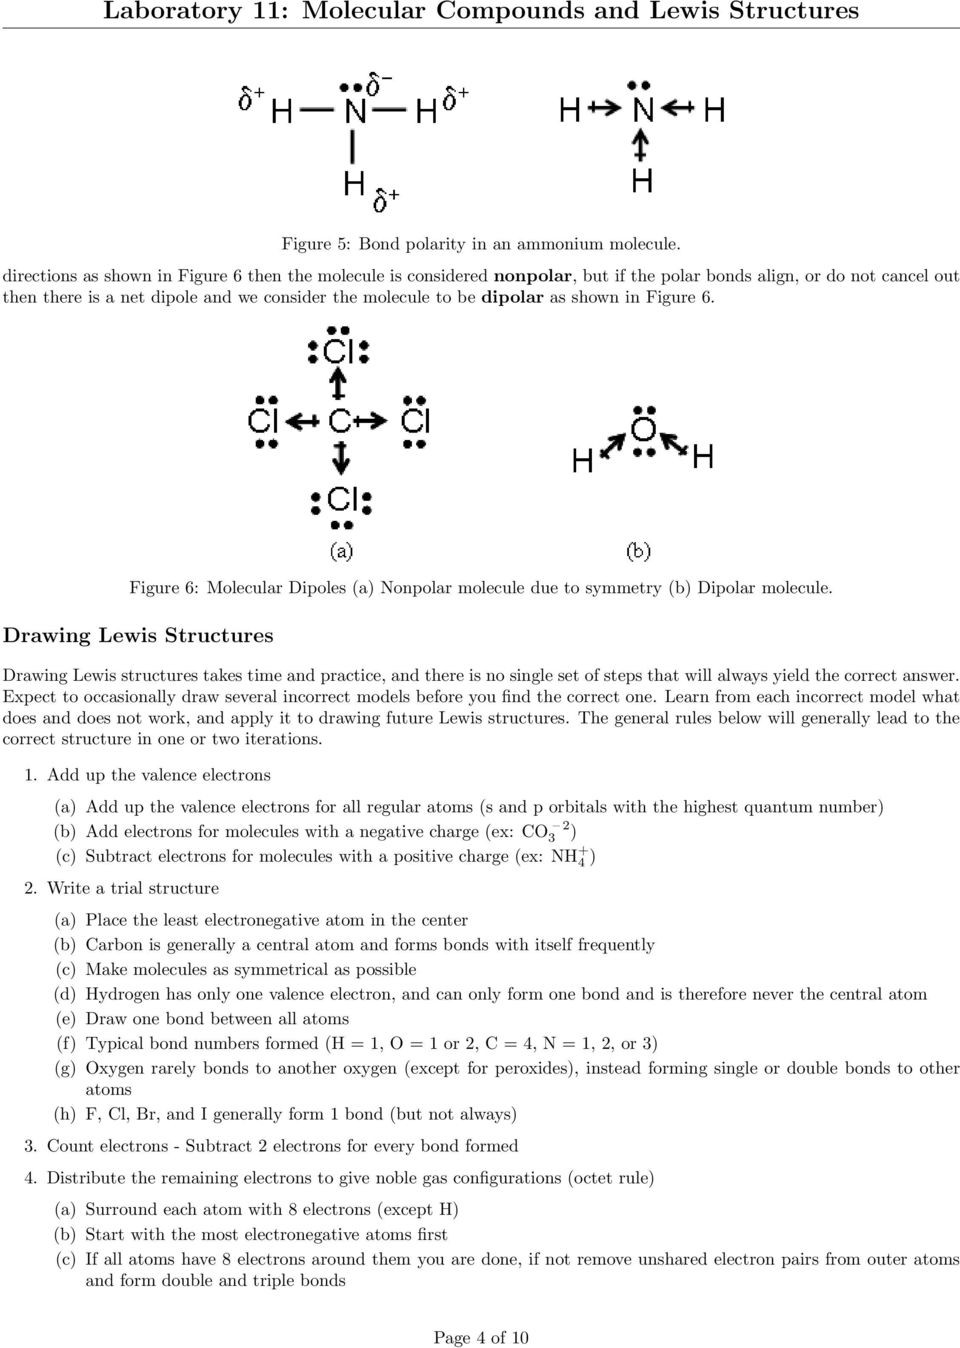 Lewis Structures Worksheet with Answers Laboratory 11 Molecular Pounds and Lewis Structures